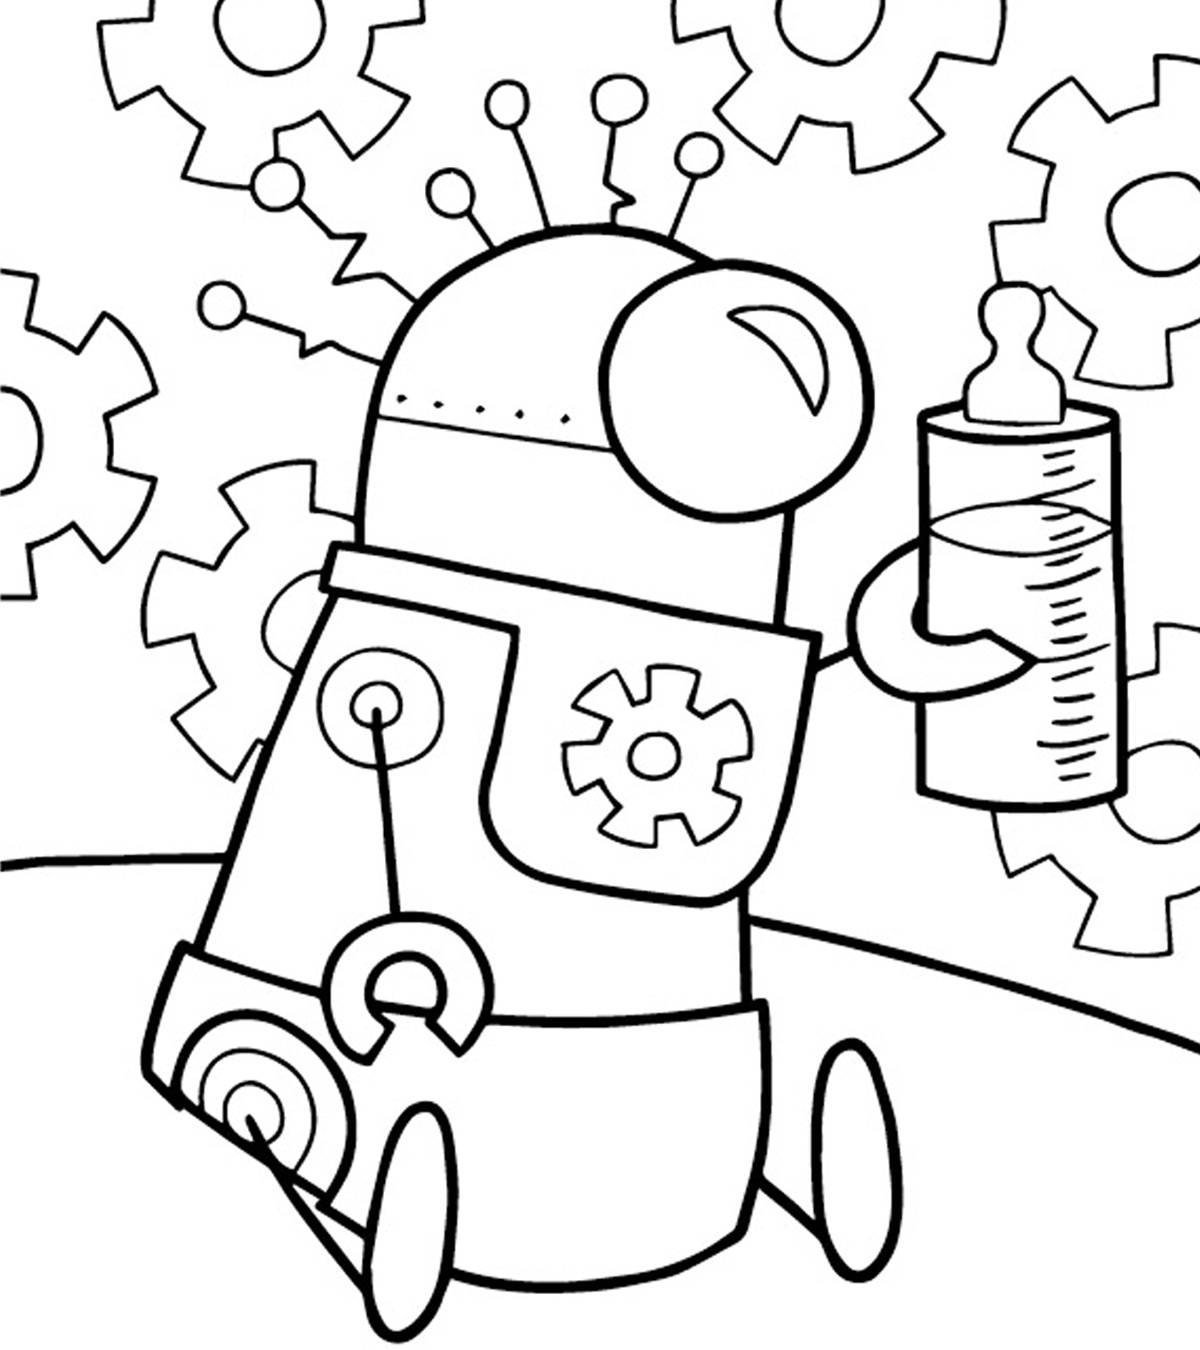 20 Cute Free Printable Robot Coloring Pages Online - free printable coloring pages for kids and adults roblox character free printable roblox coloring pages